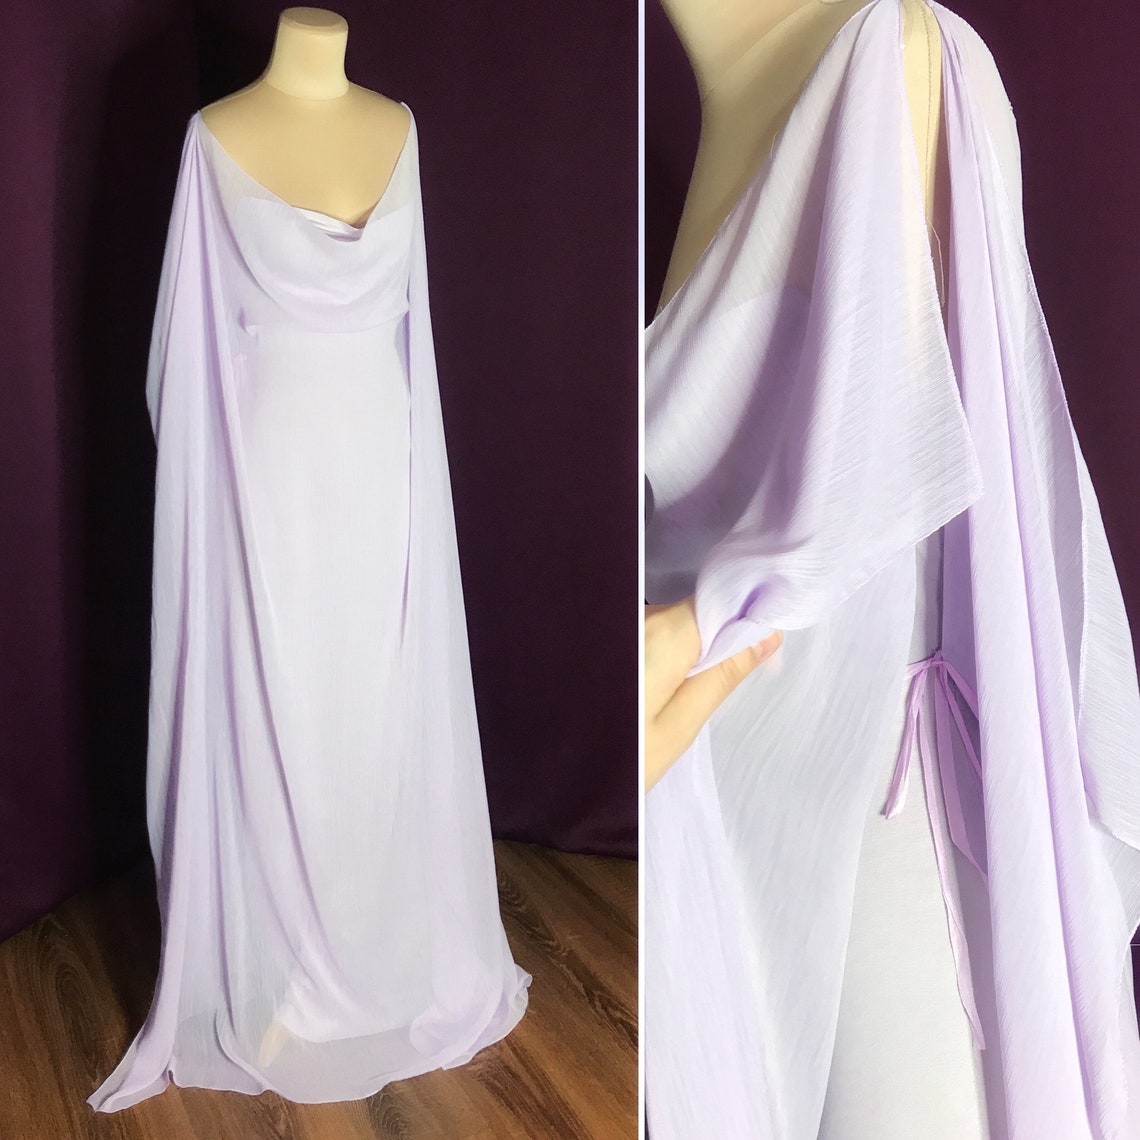 Arwen The Lord of the Rings cosplay dress | Etsy